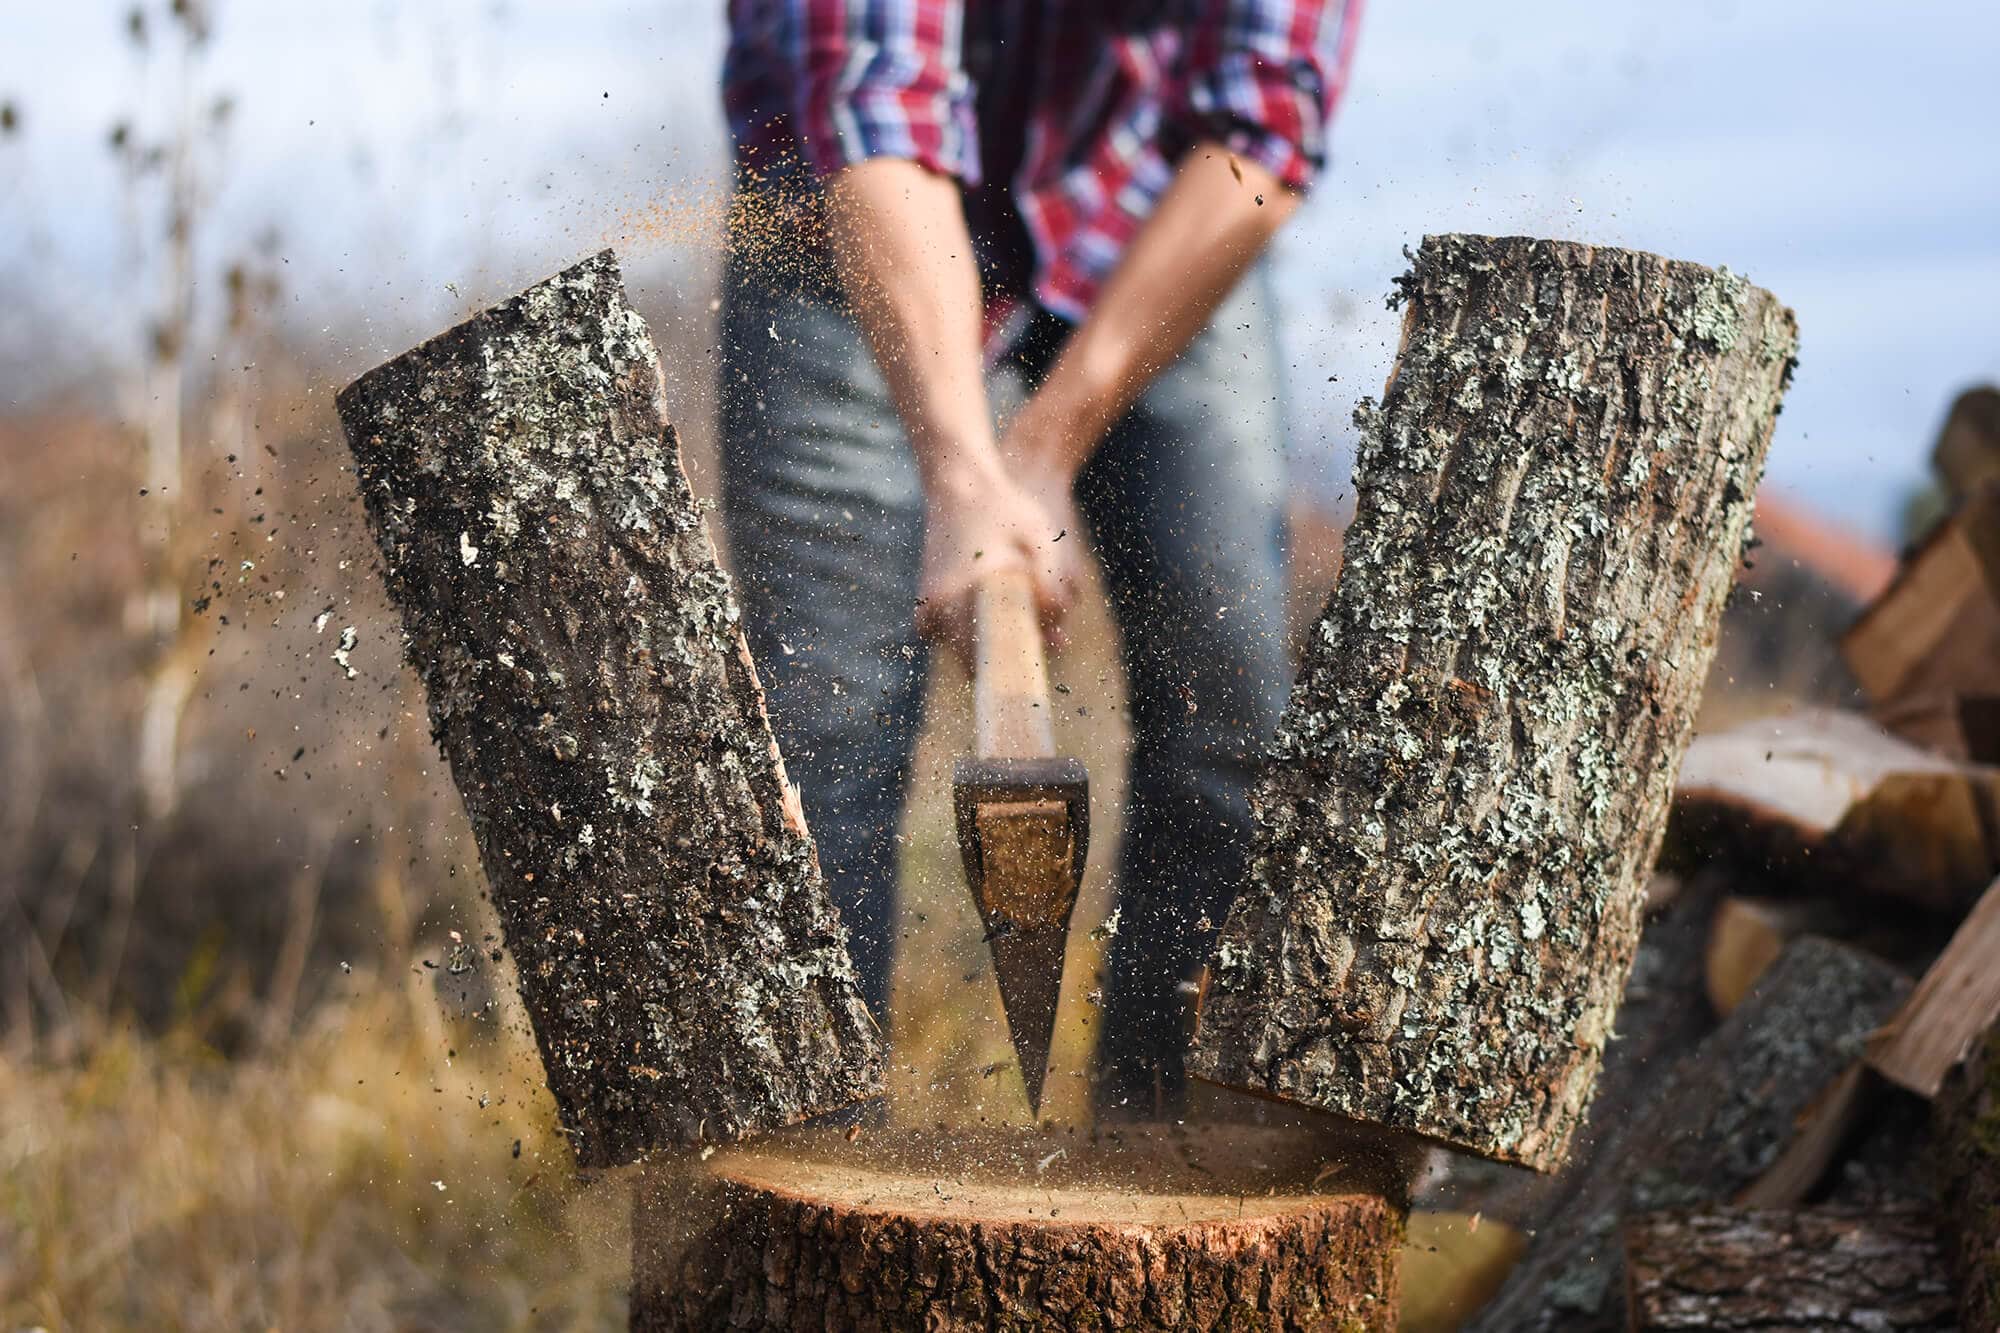 Featured image chopping firewood